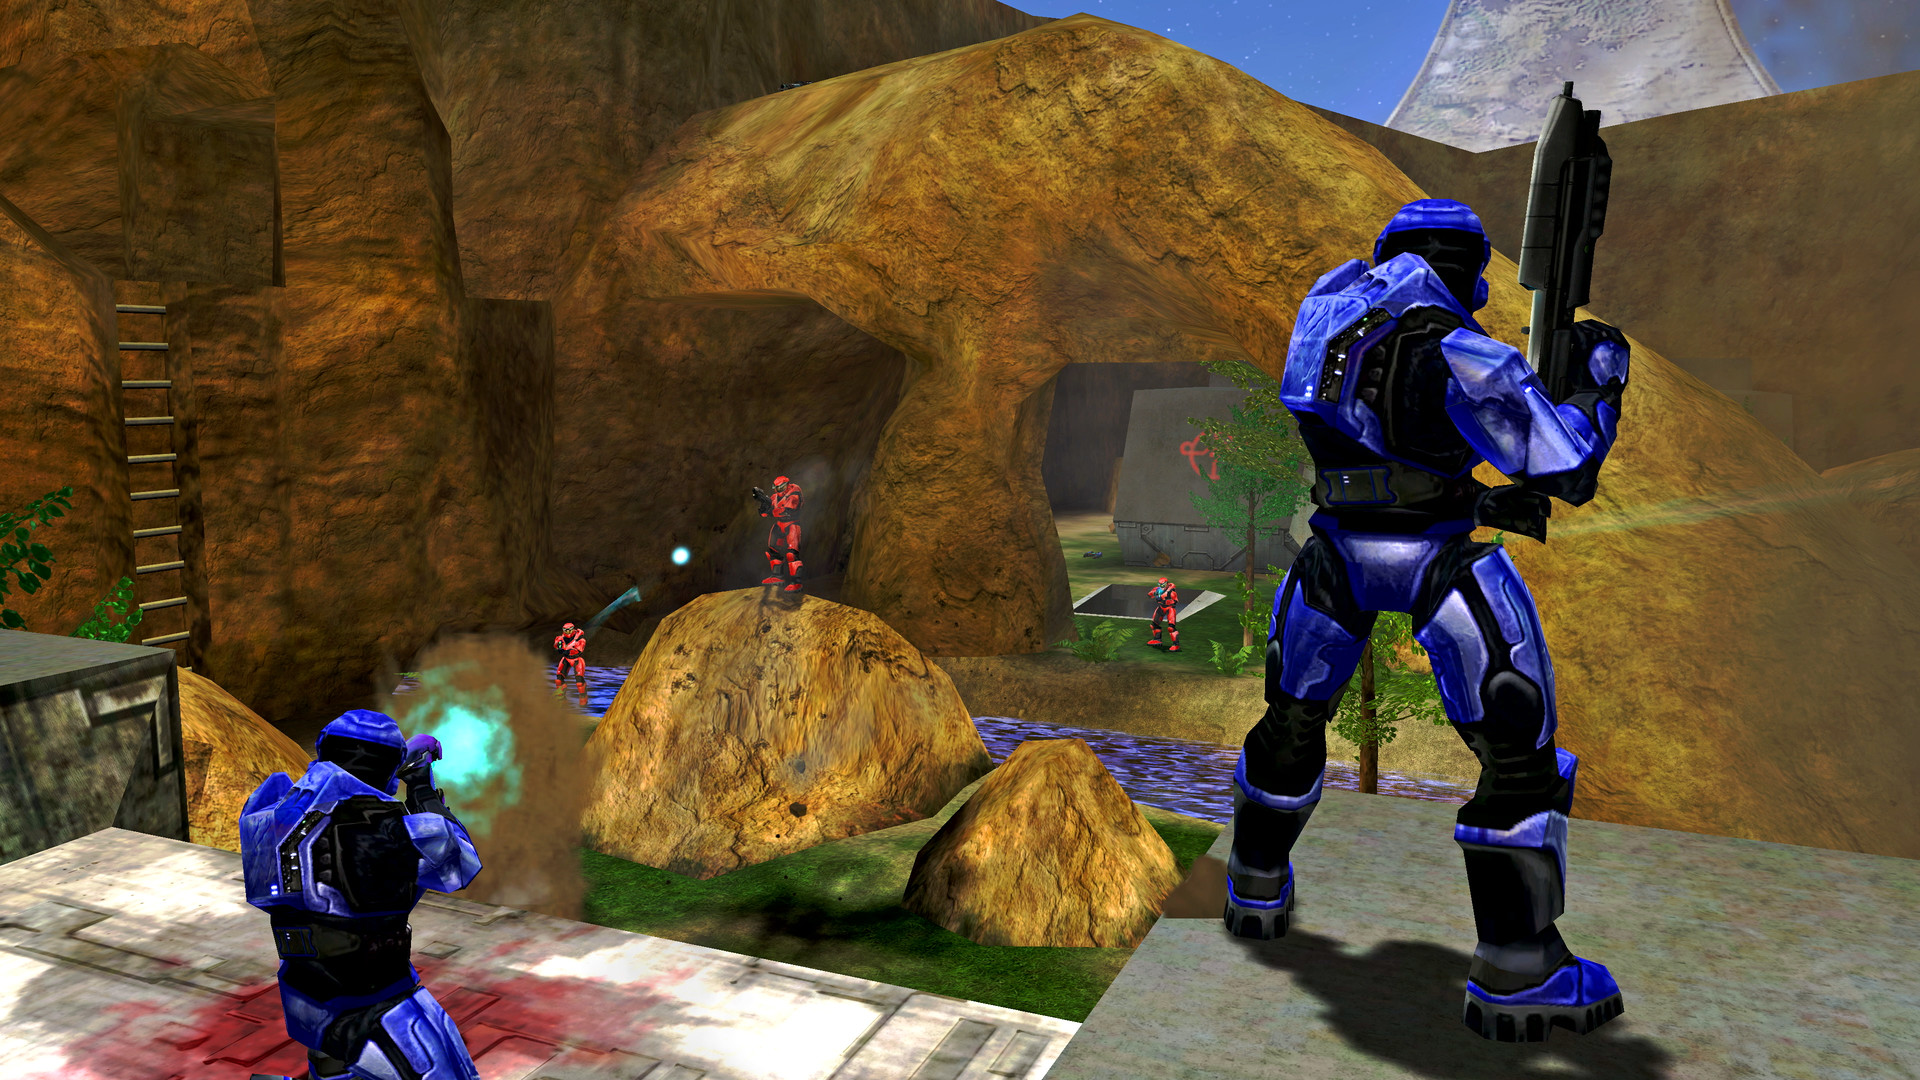 Save 75% on Halo: Combat Evolved Anniversary on Steam